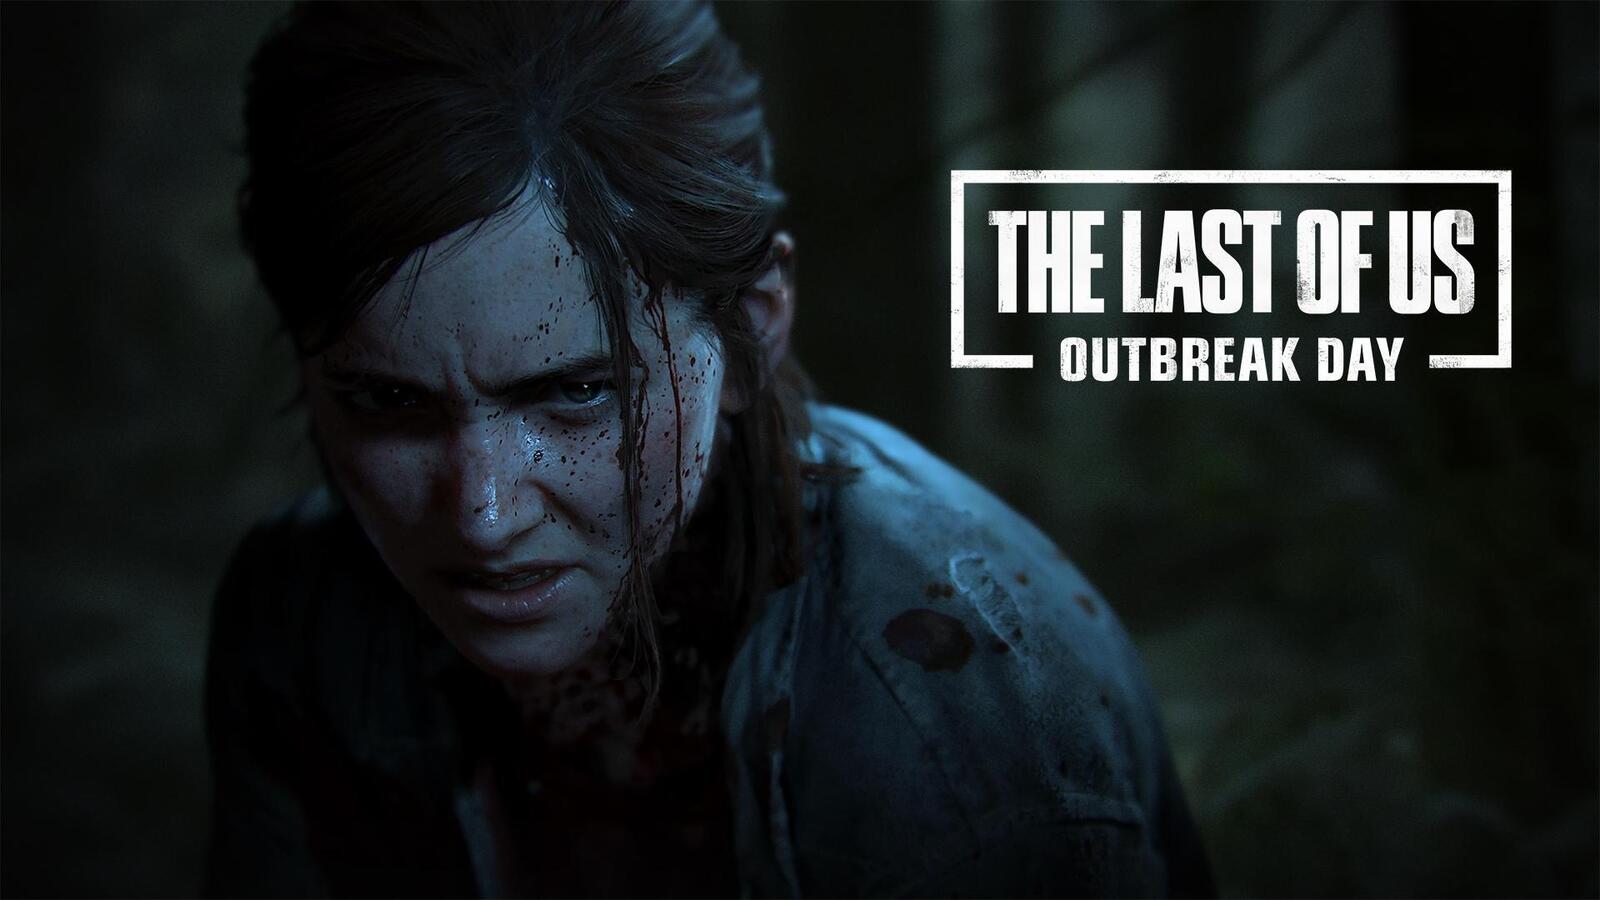 Free photo Screensaver from the last of us part ii outbreak day